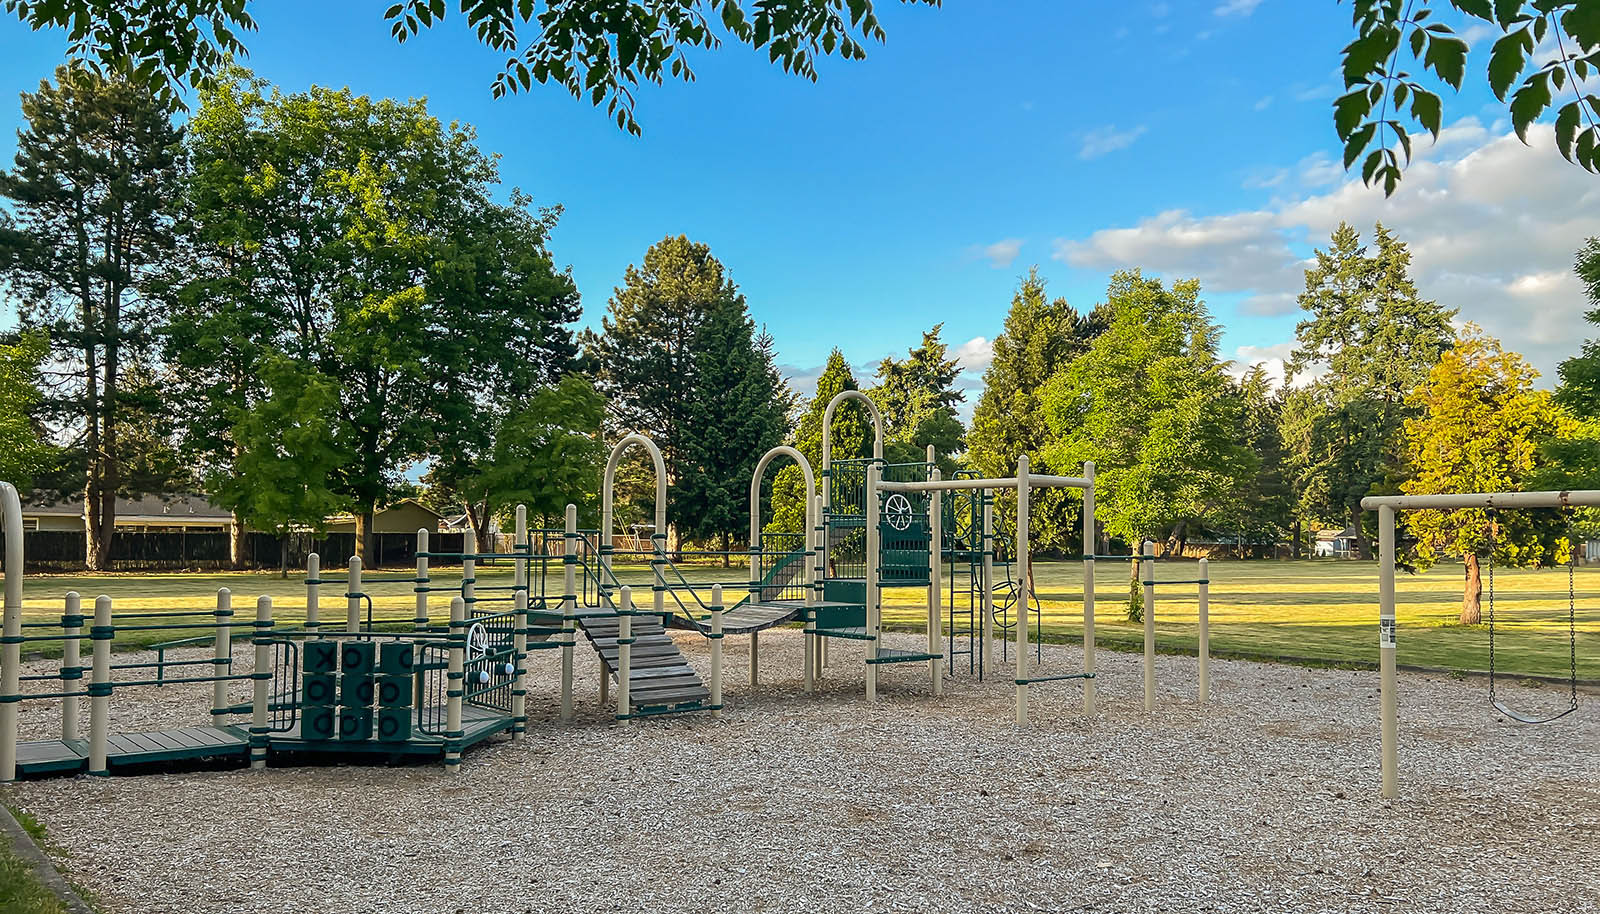 Carl Gustafson Park play structure